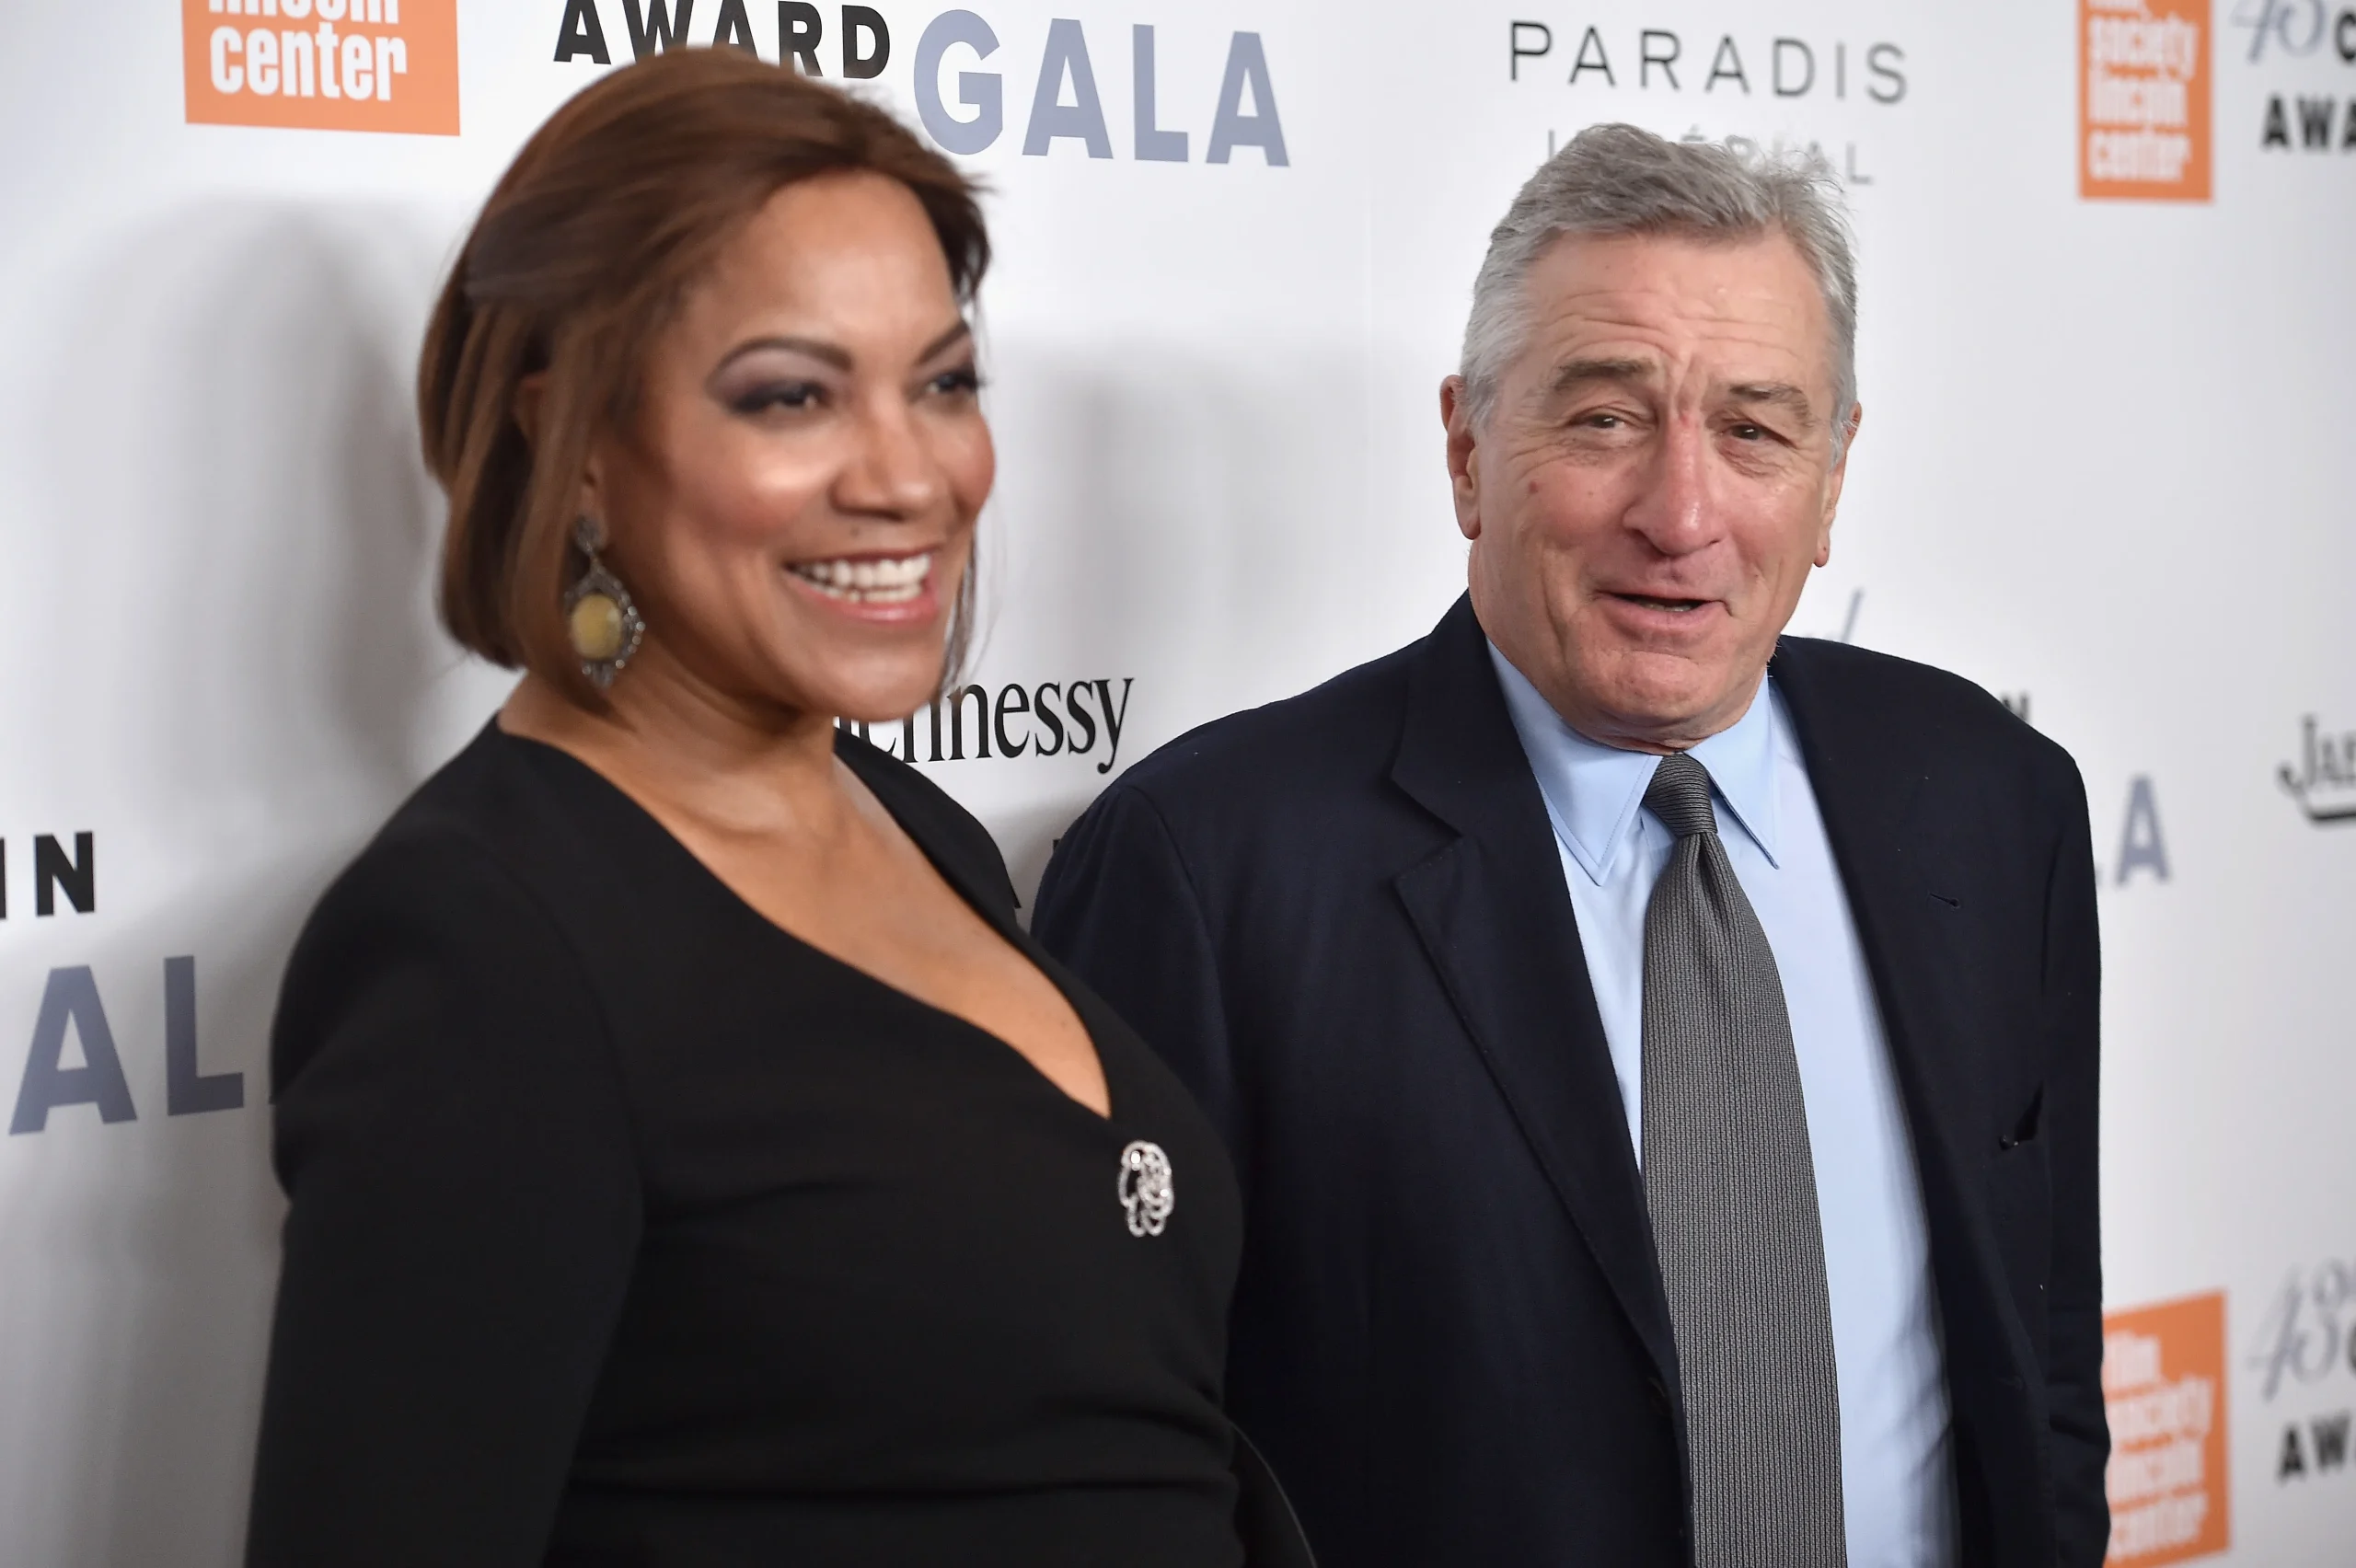 Who Is Grace Hightower? All You Need To Know About Robert De Niro’s Ex-Wife